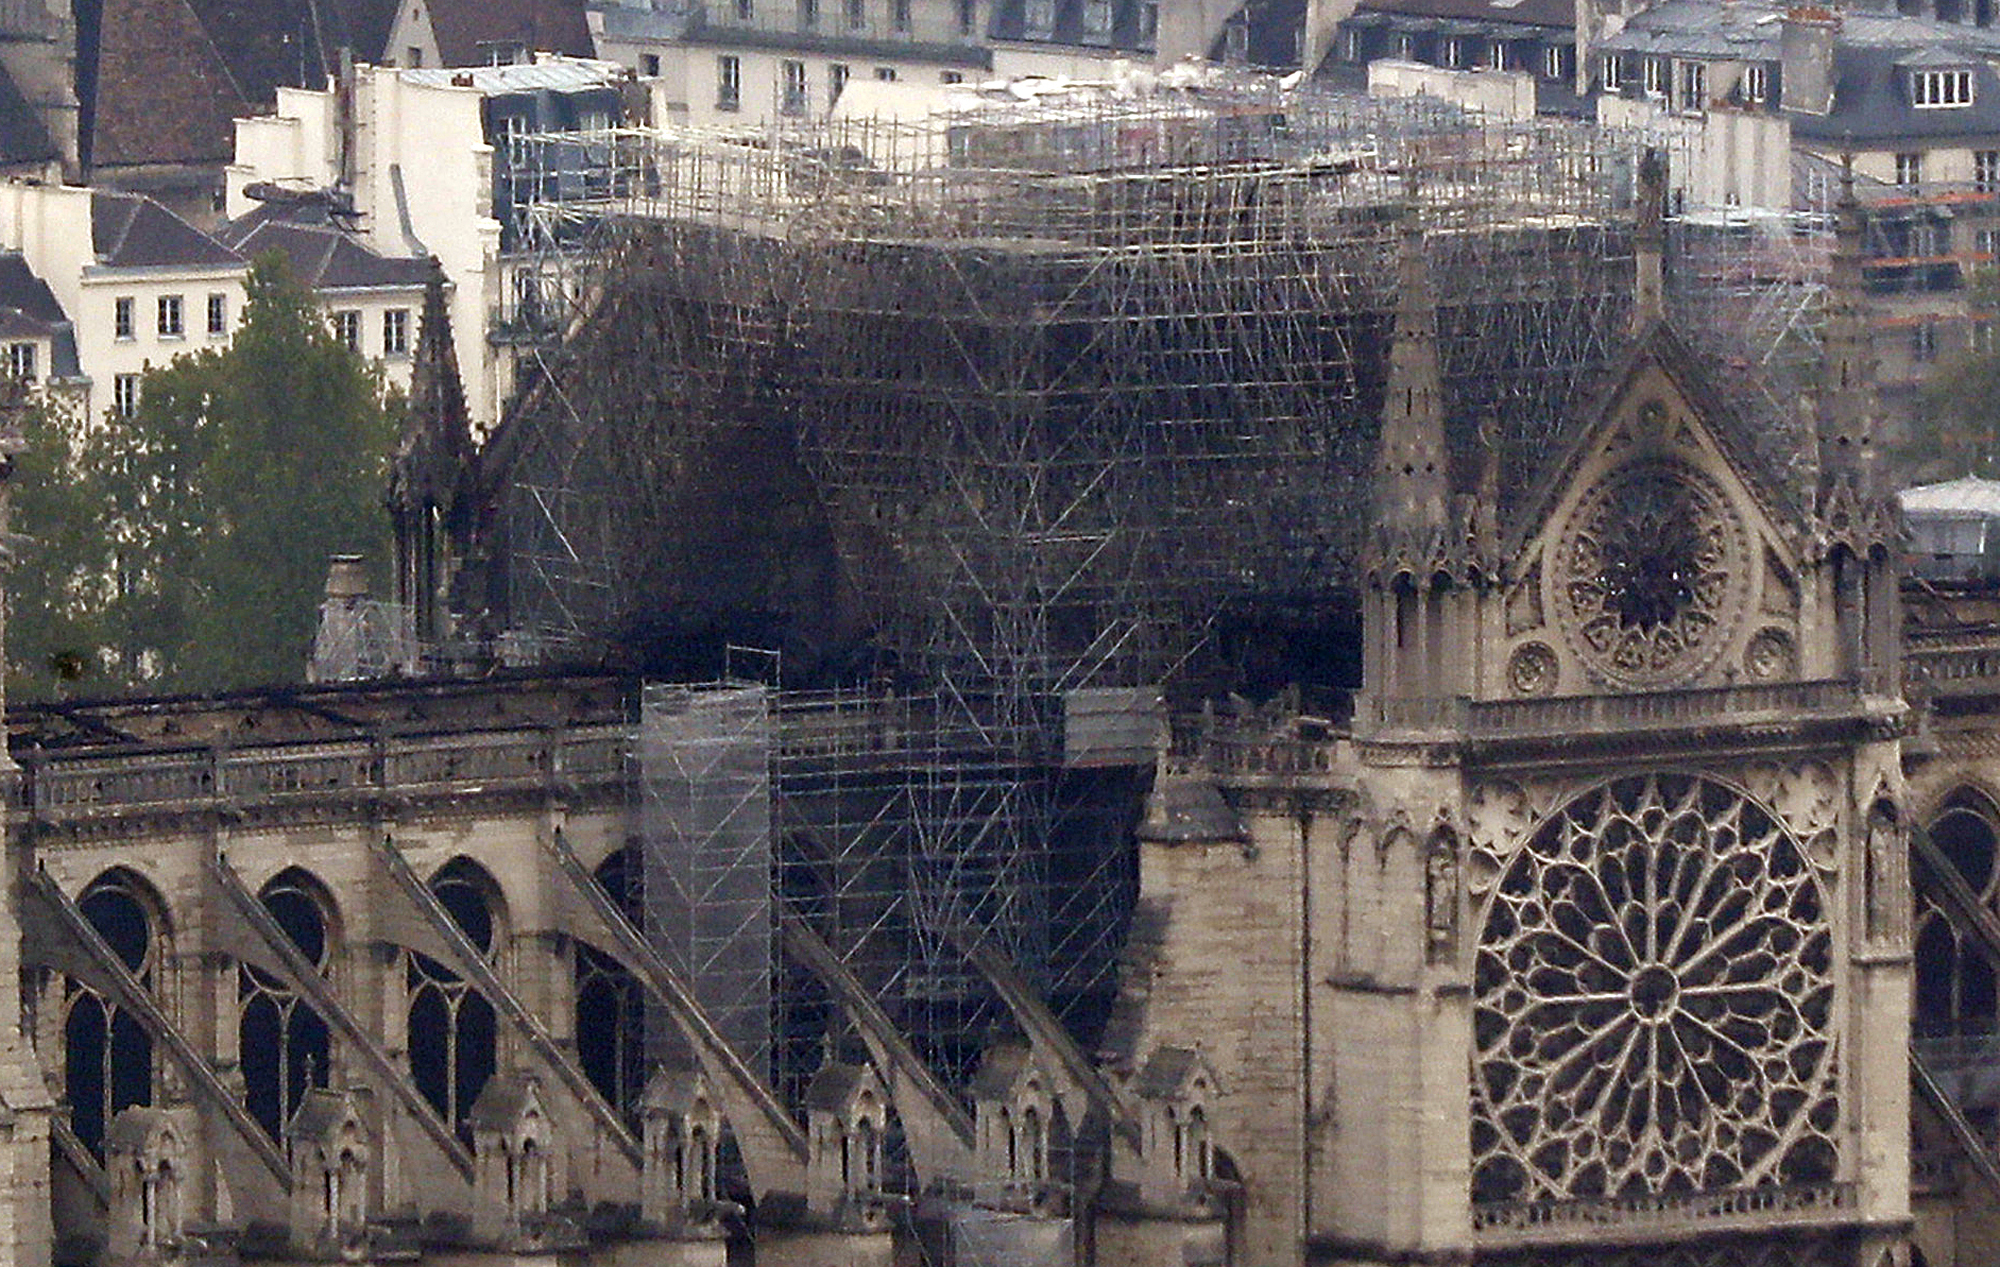 repetition Peave London Here's what Notre Dame looks like after a 9-hour fire